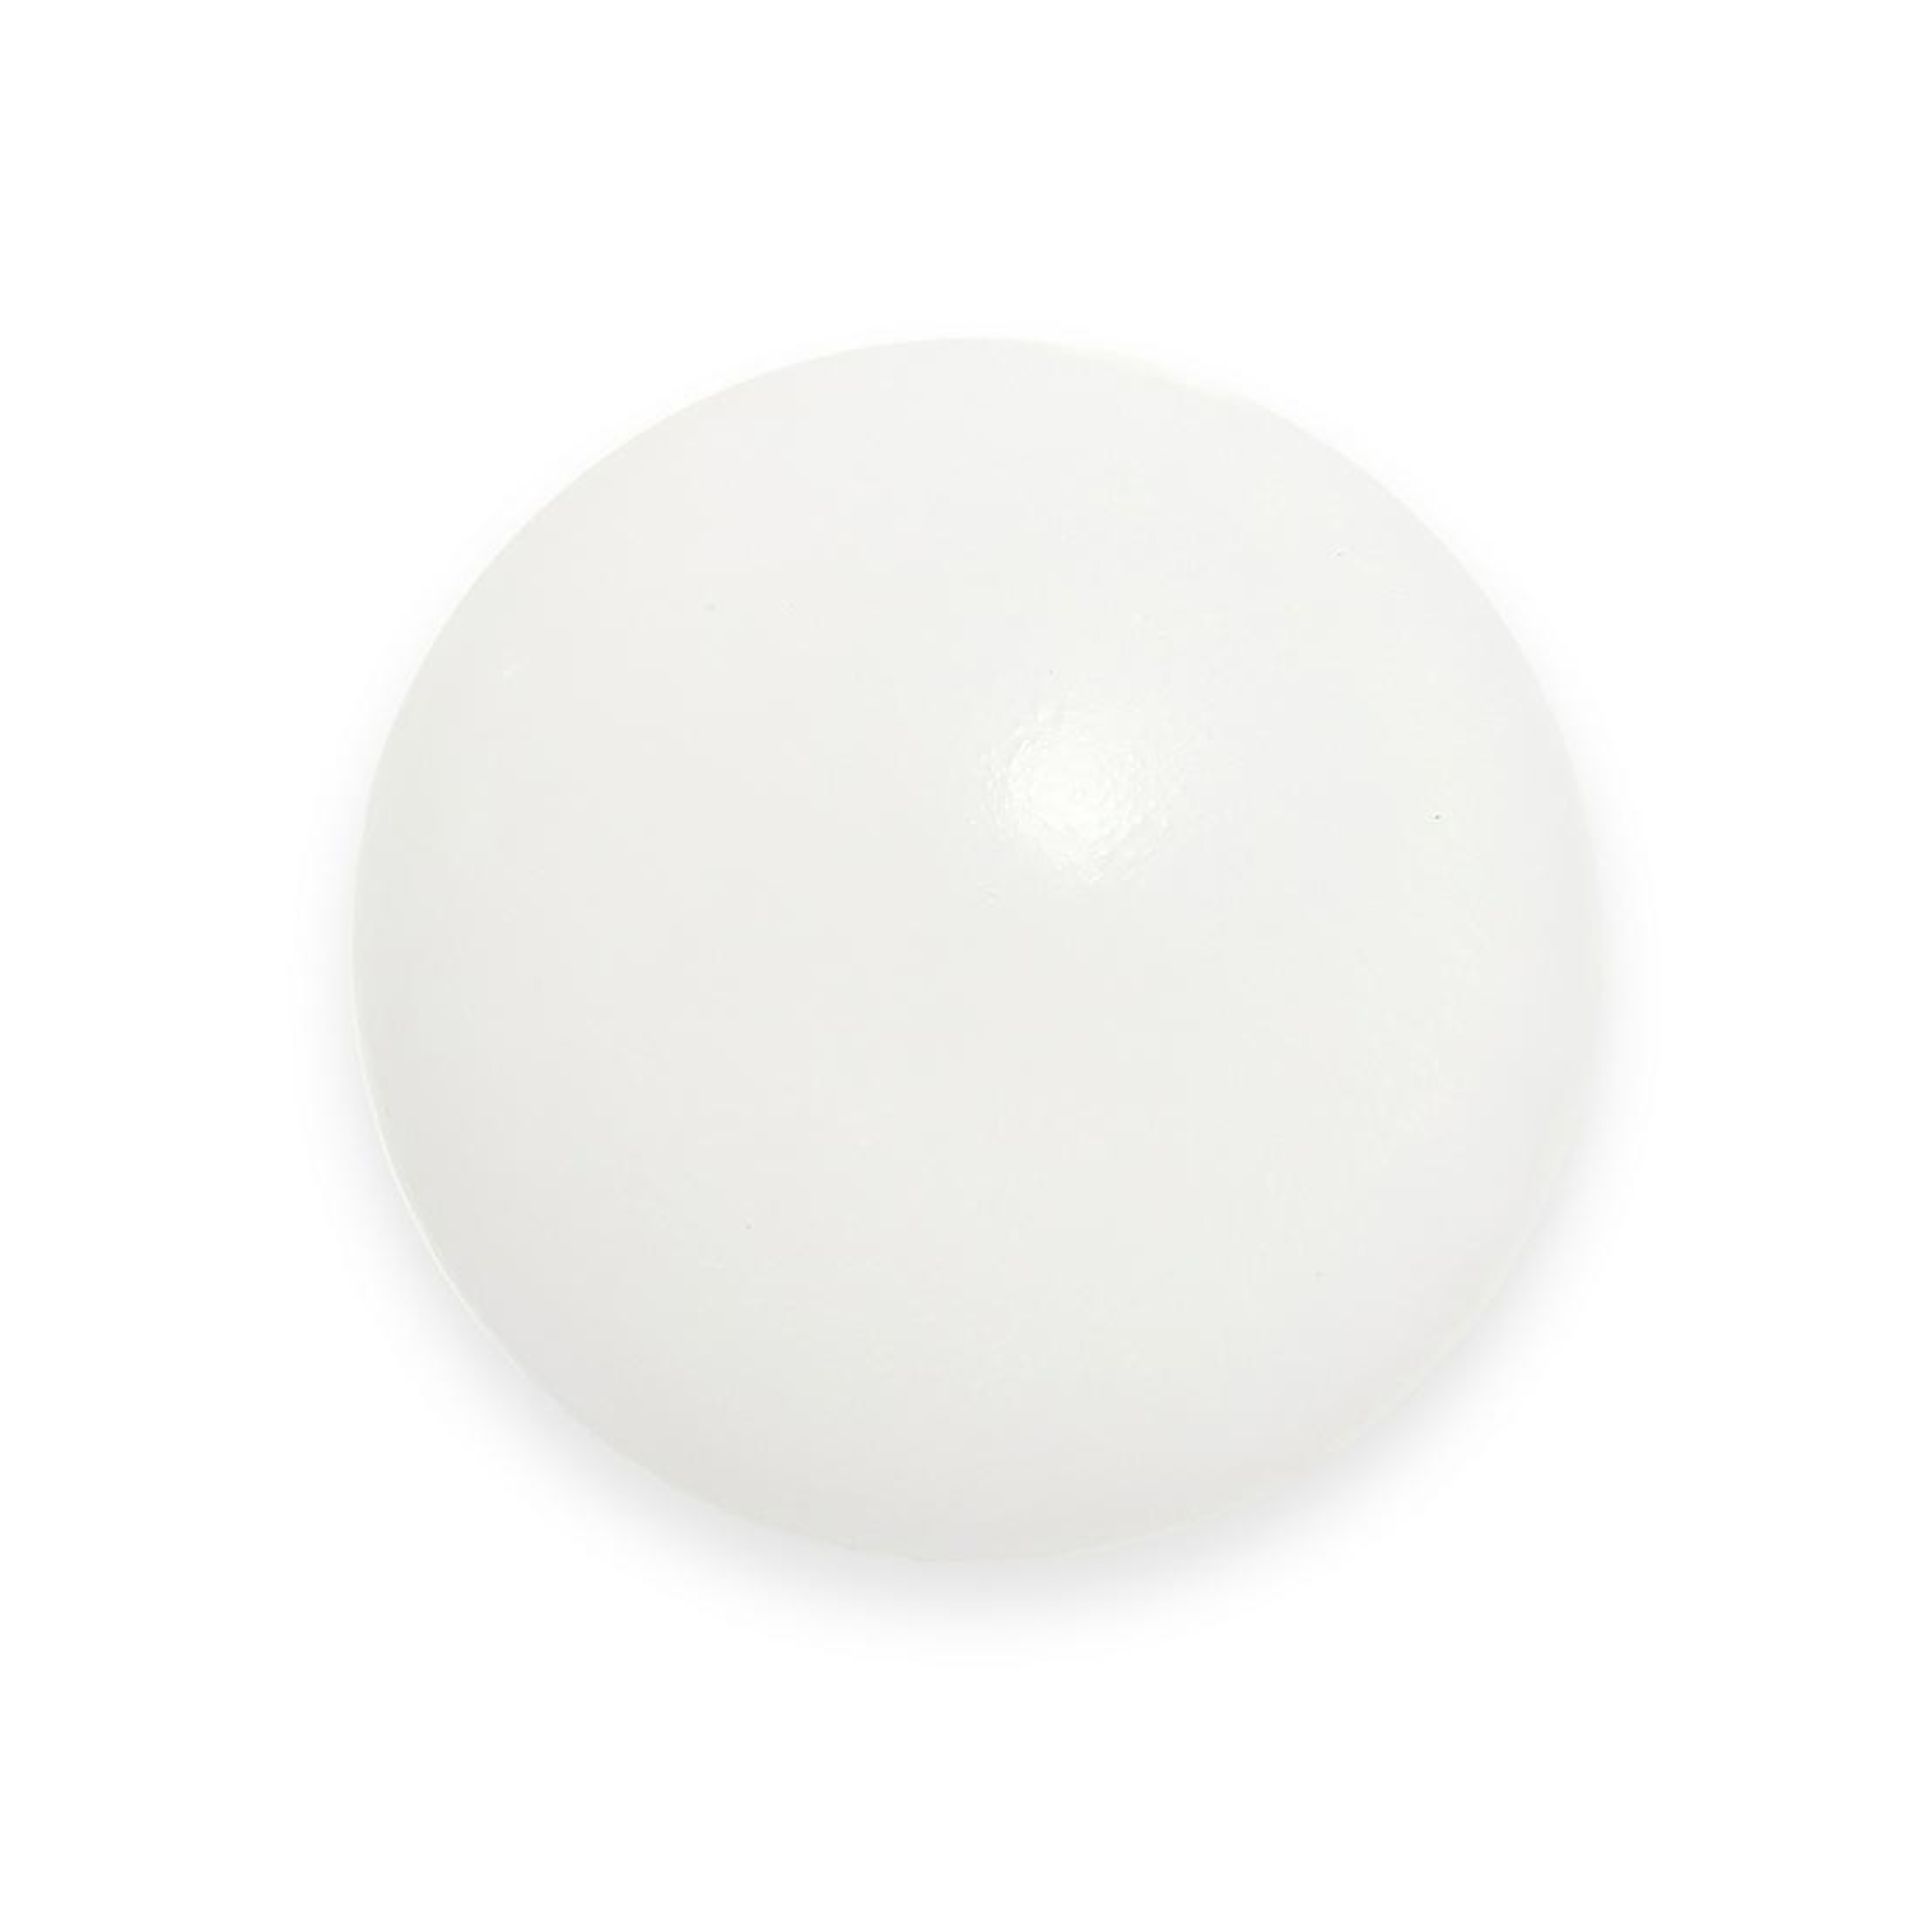 AN UNMOUNTED NON-NACREOUS NATURAL SALTWATER PEARL 16.3mm x 16.4mm x 13.1mm, 25.03 carats, 5.0g.